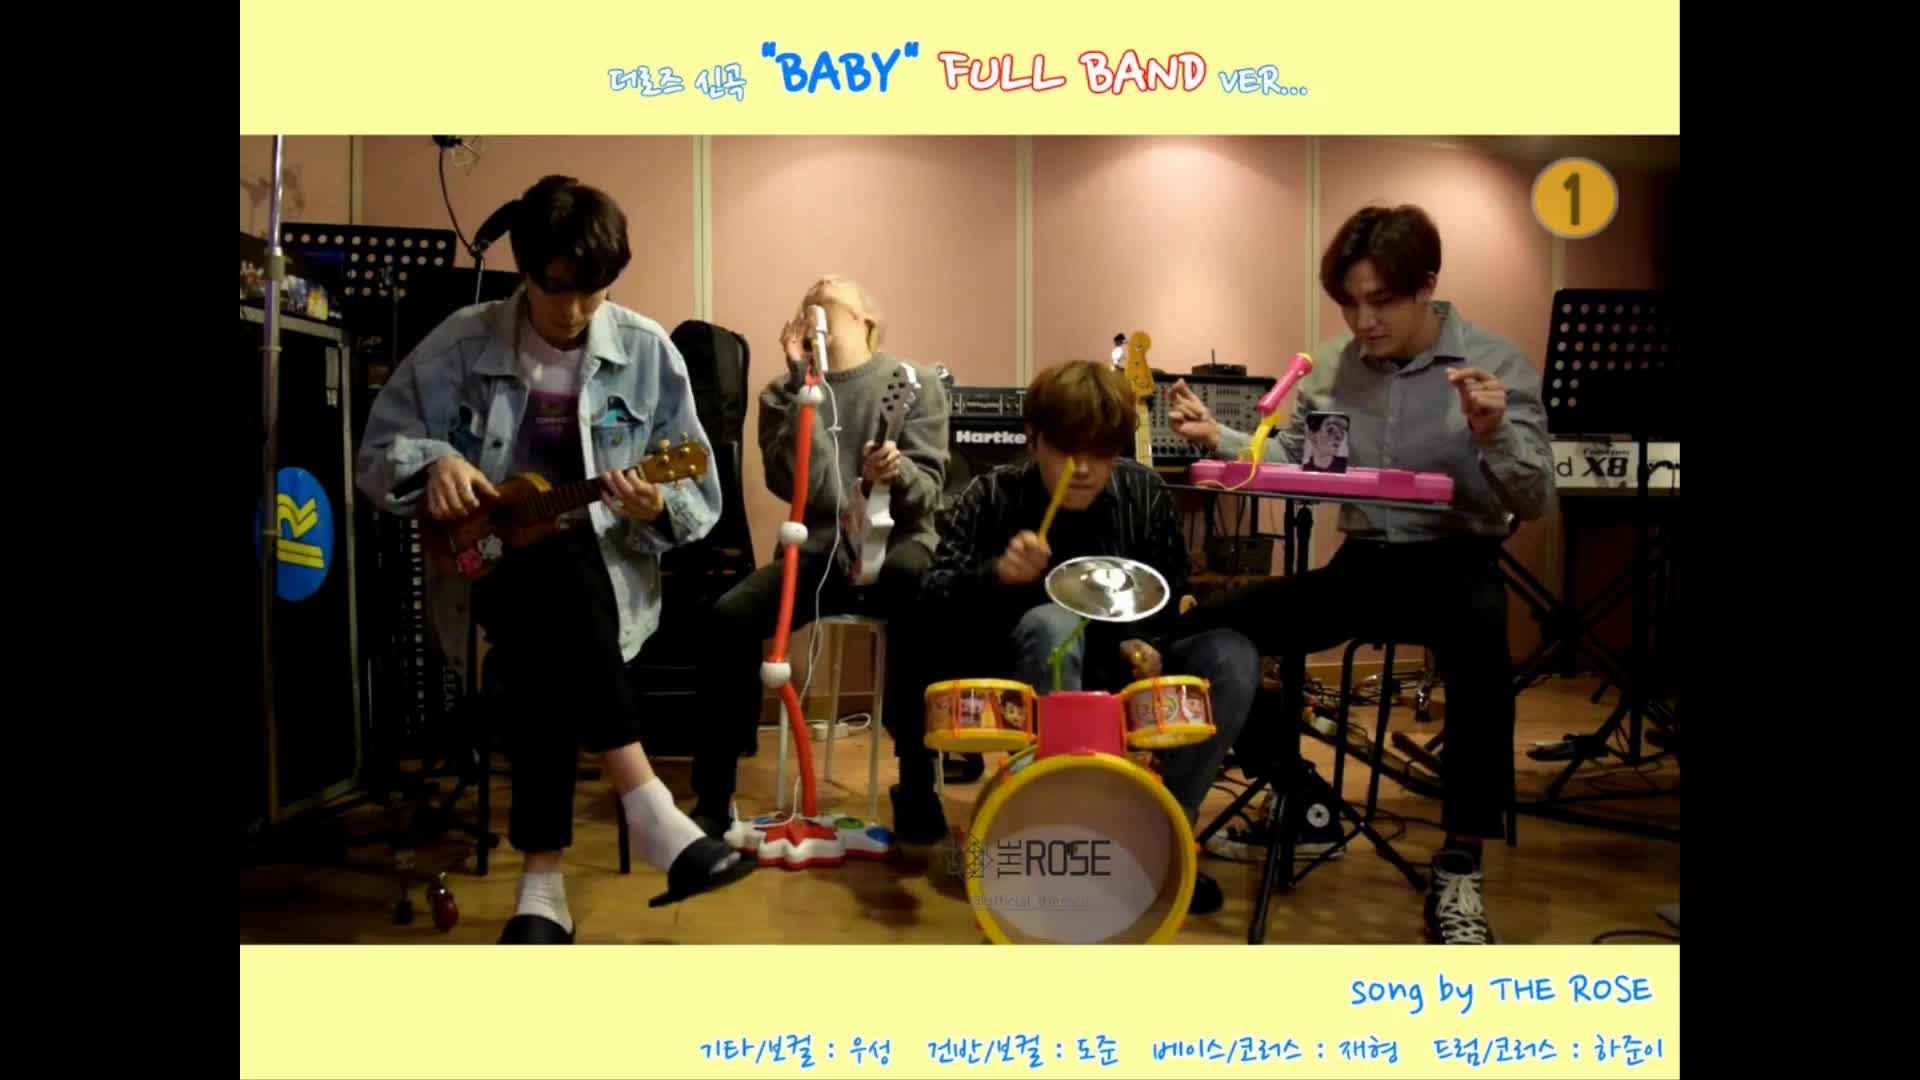 The Rose 신곡 "BABY" Full Band Ver.